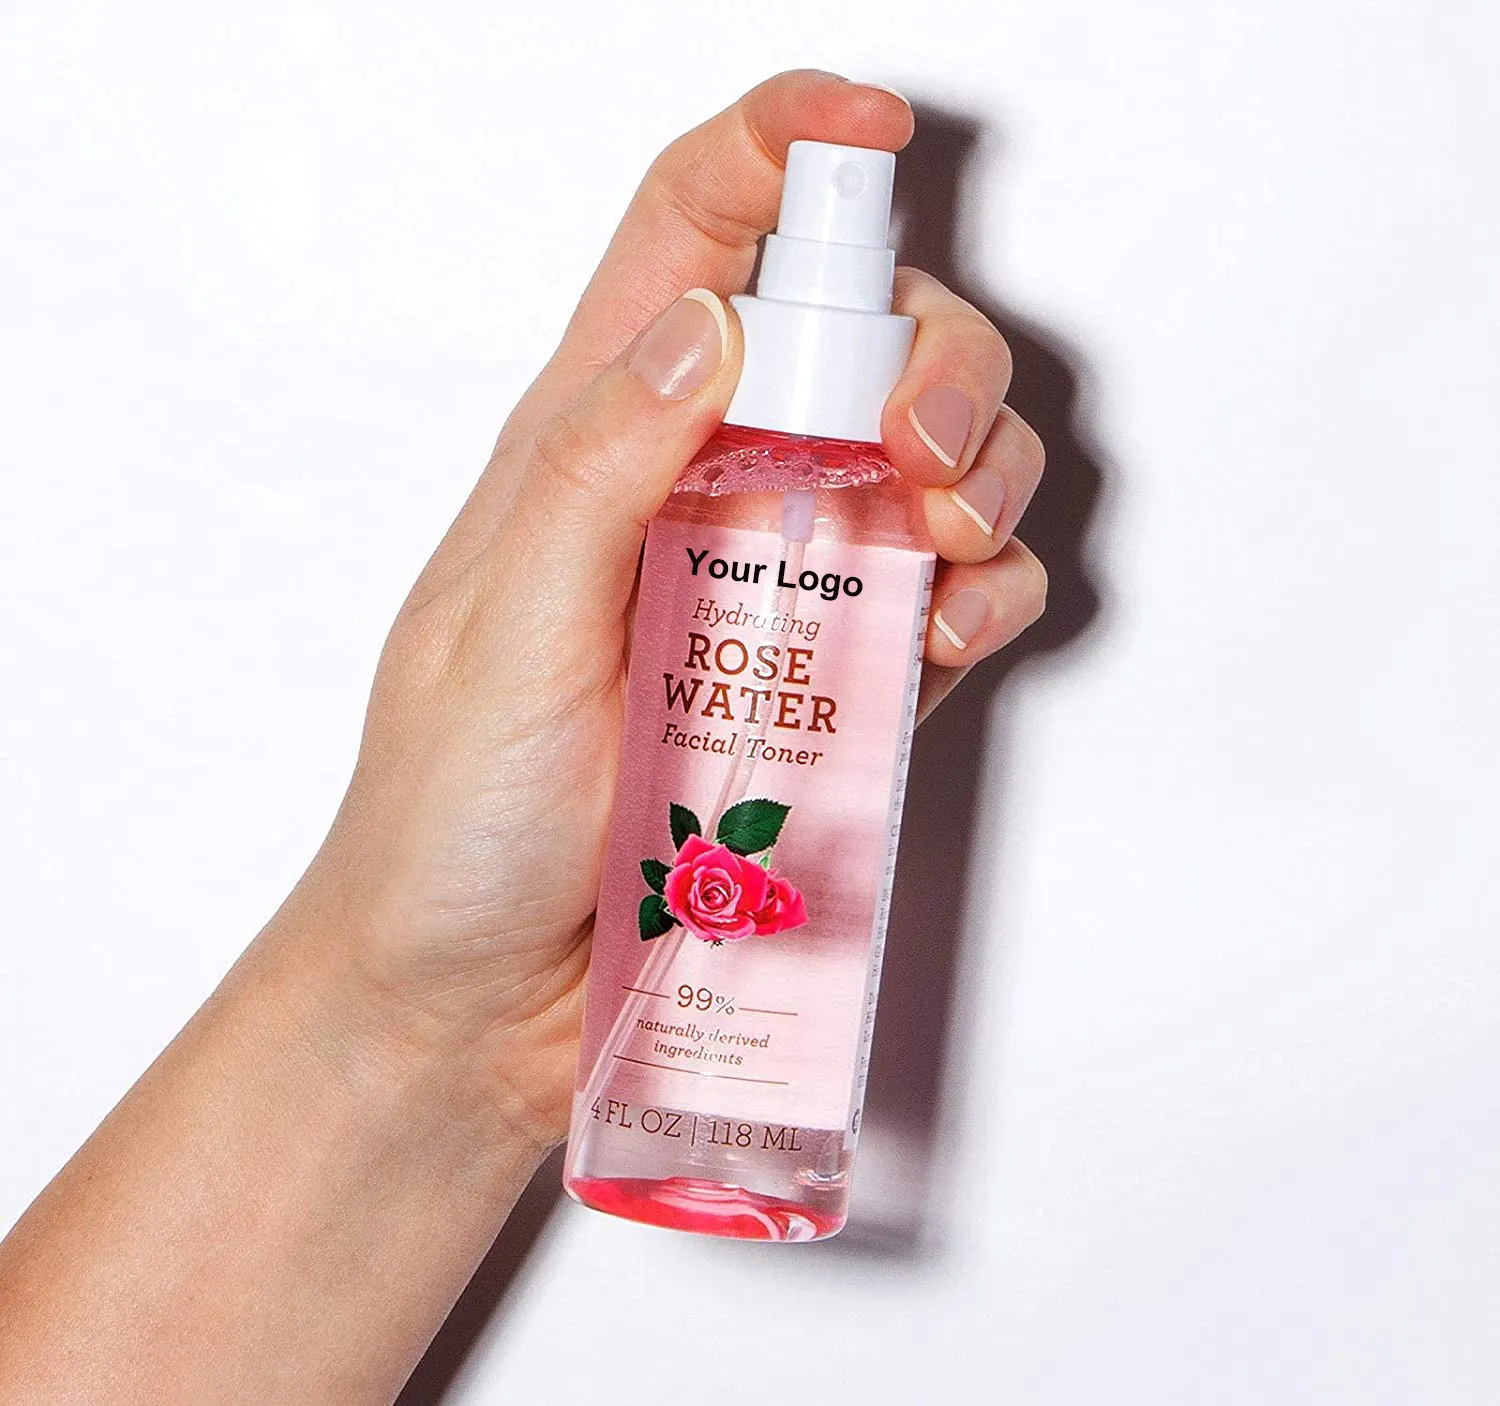 Low MOQ Private Label Rose Water with Niacinamide Hyaluronic Acid Rose Water Spray Toner